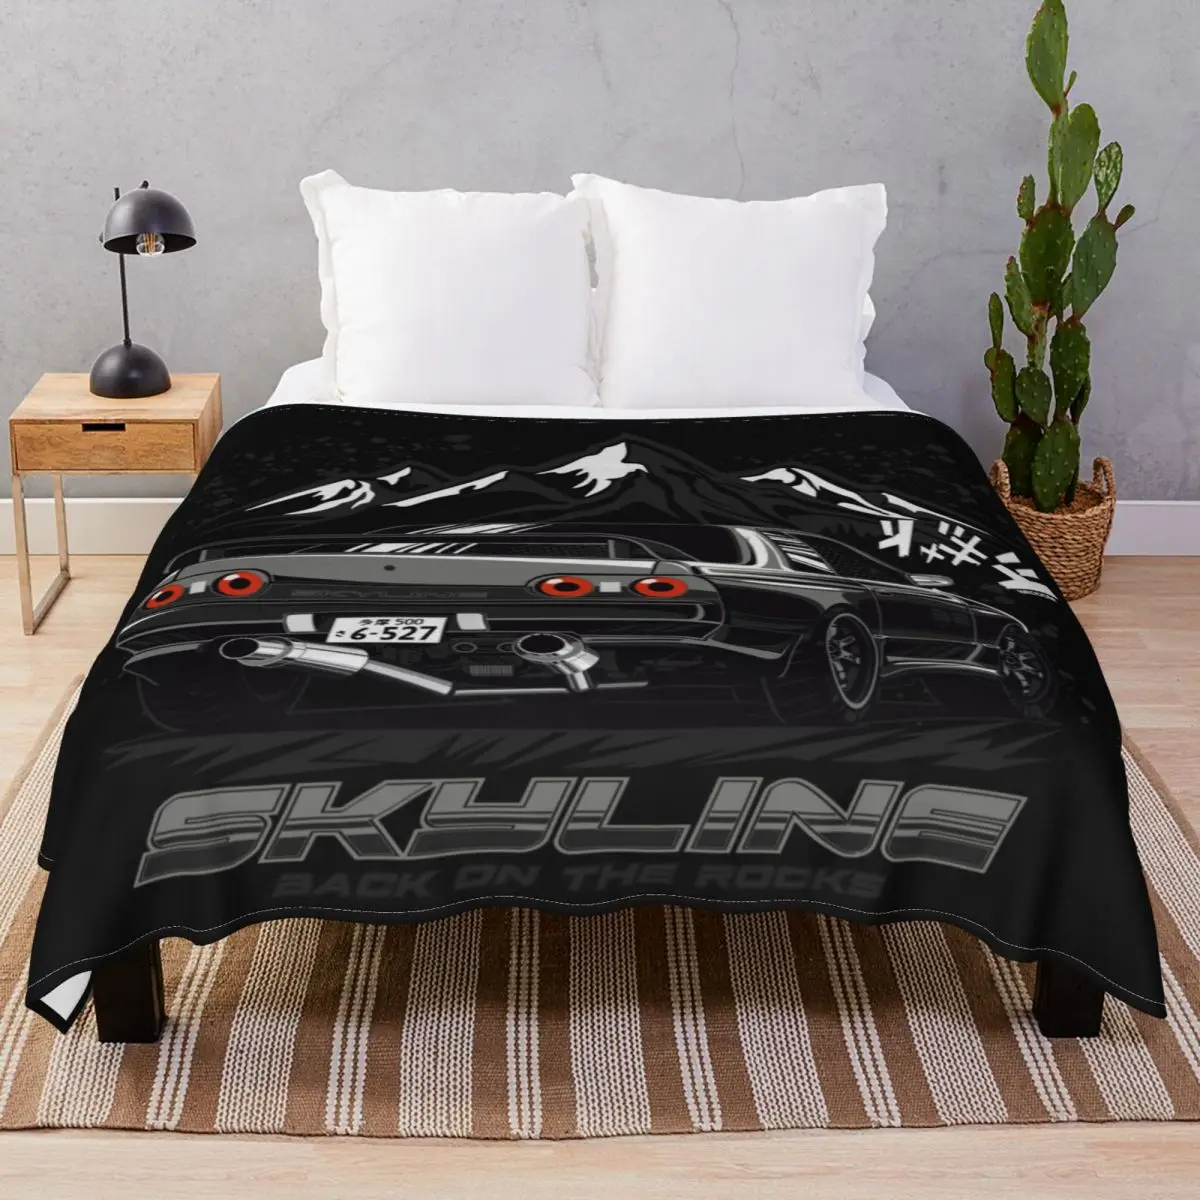 VR38 Swapped Skyline R32 Blankets Flannel Decoration Comfortable Throw Blanket for Bedding Home Couch Travel Cinema